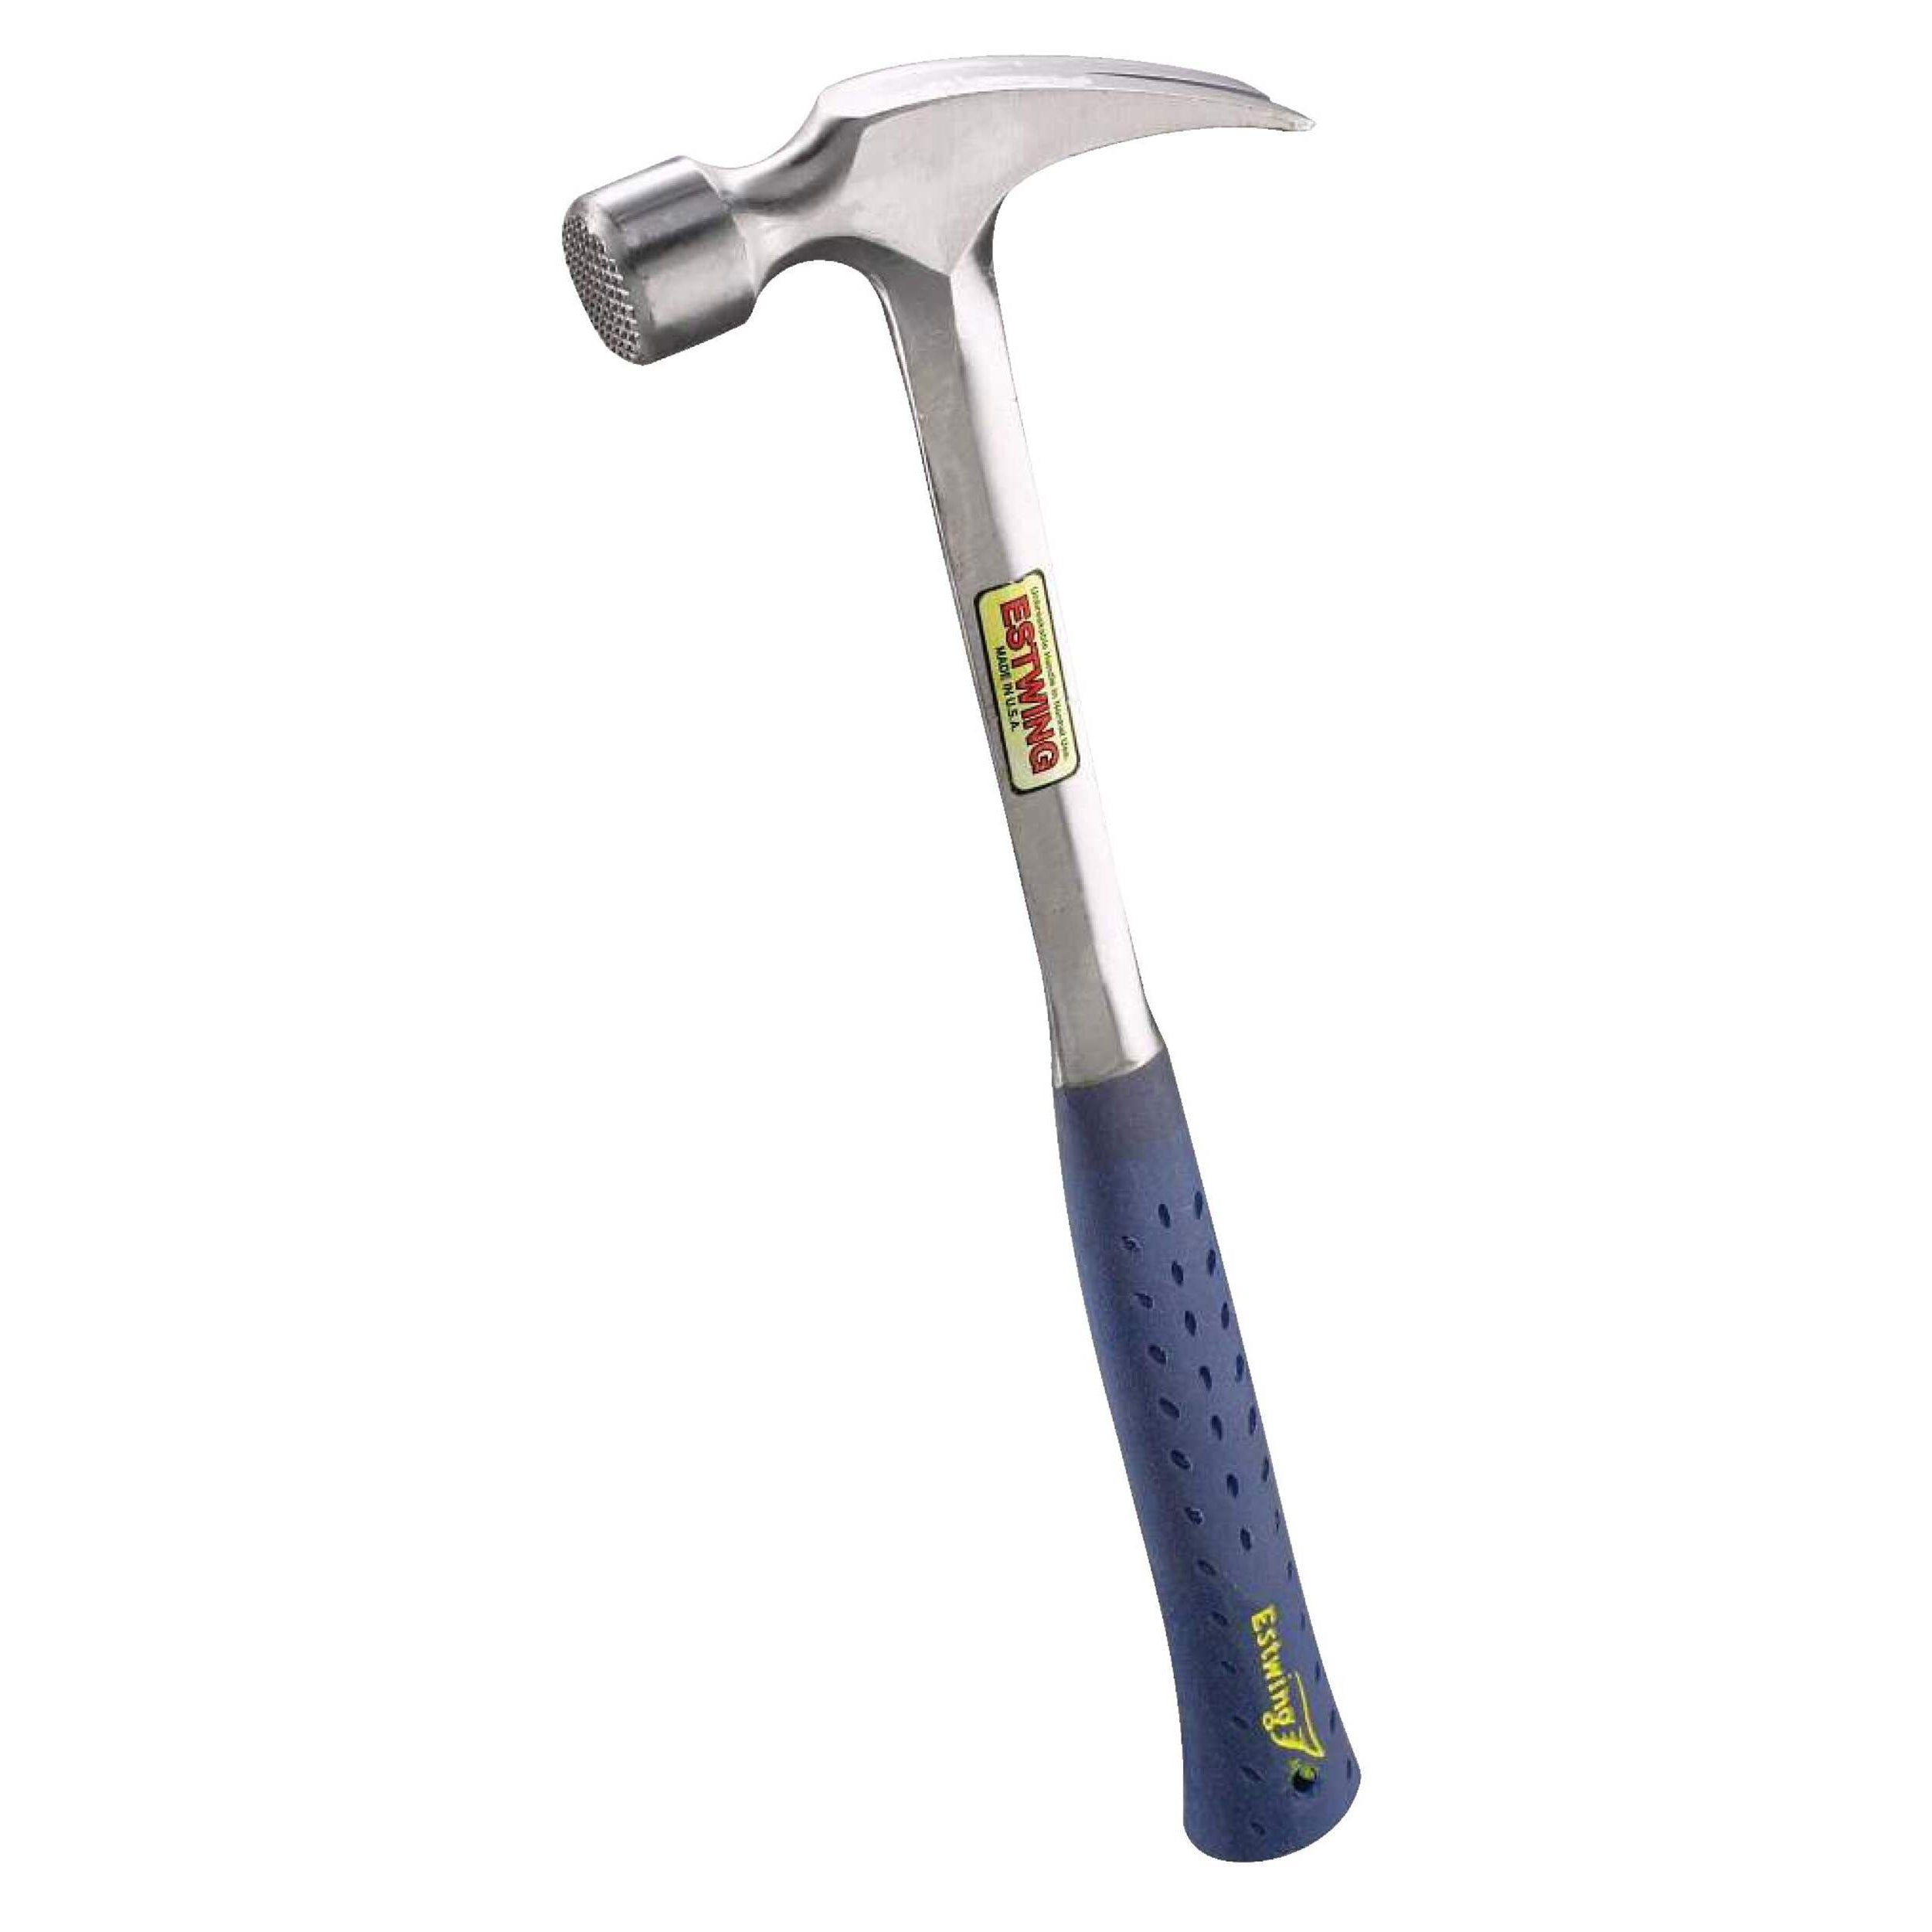 Estwing 22-oz Framing Hammer with Milled Face with Shock Reduction Grip, E3-22SM